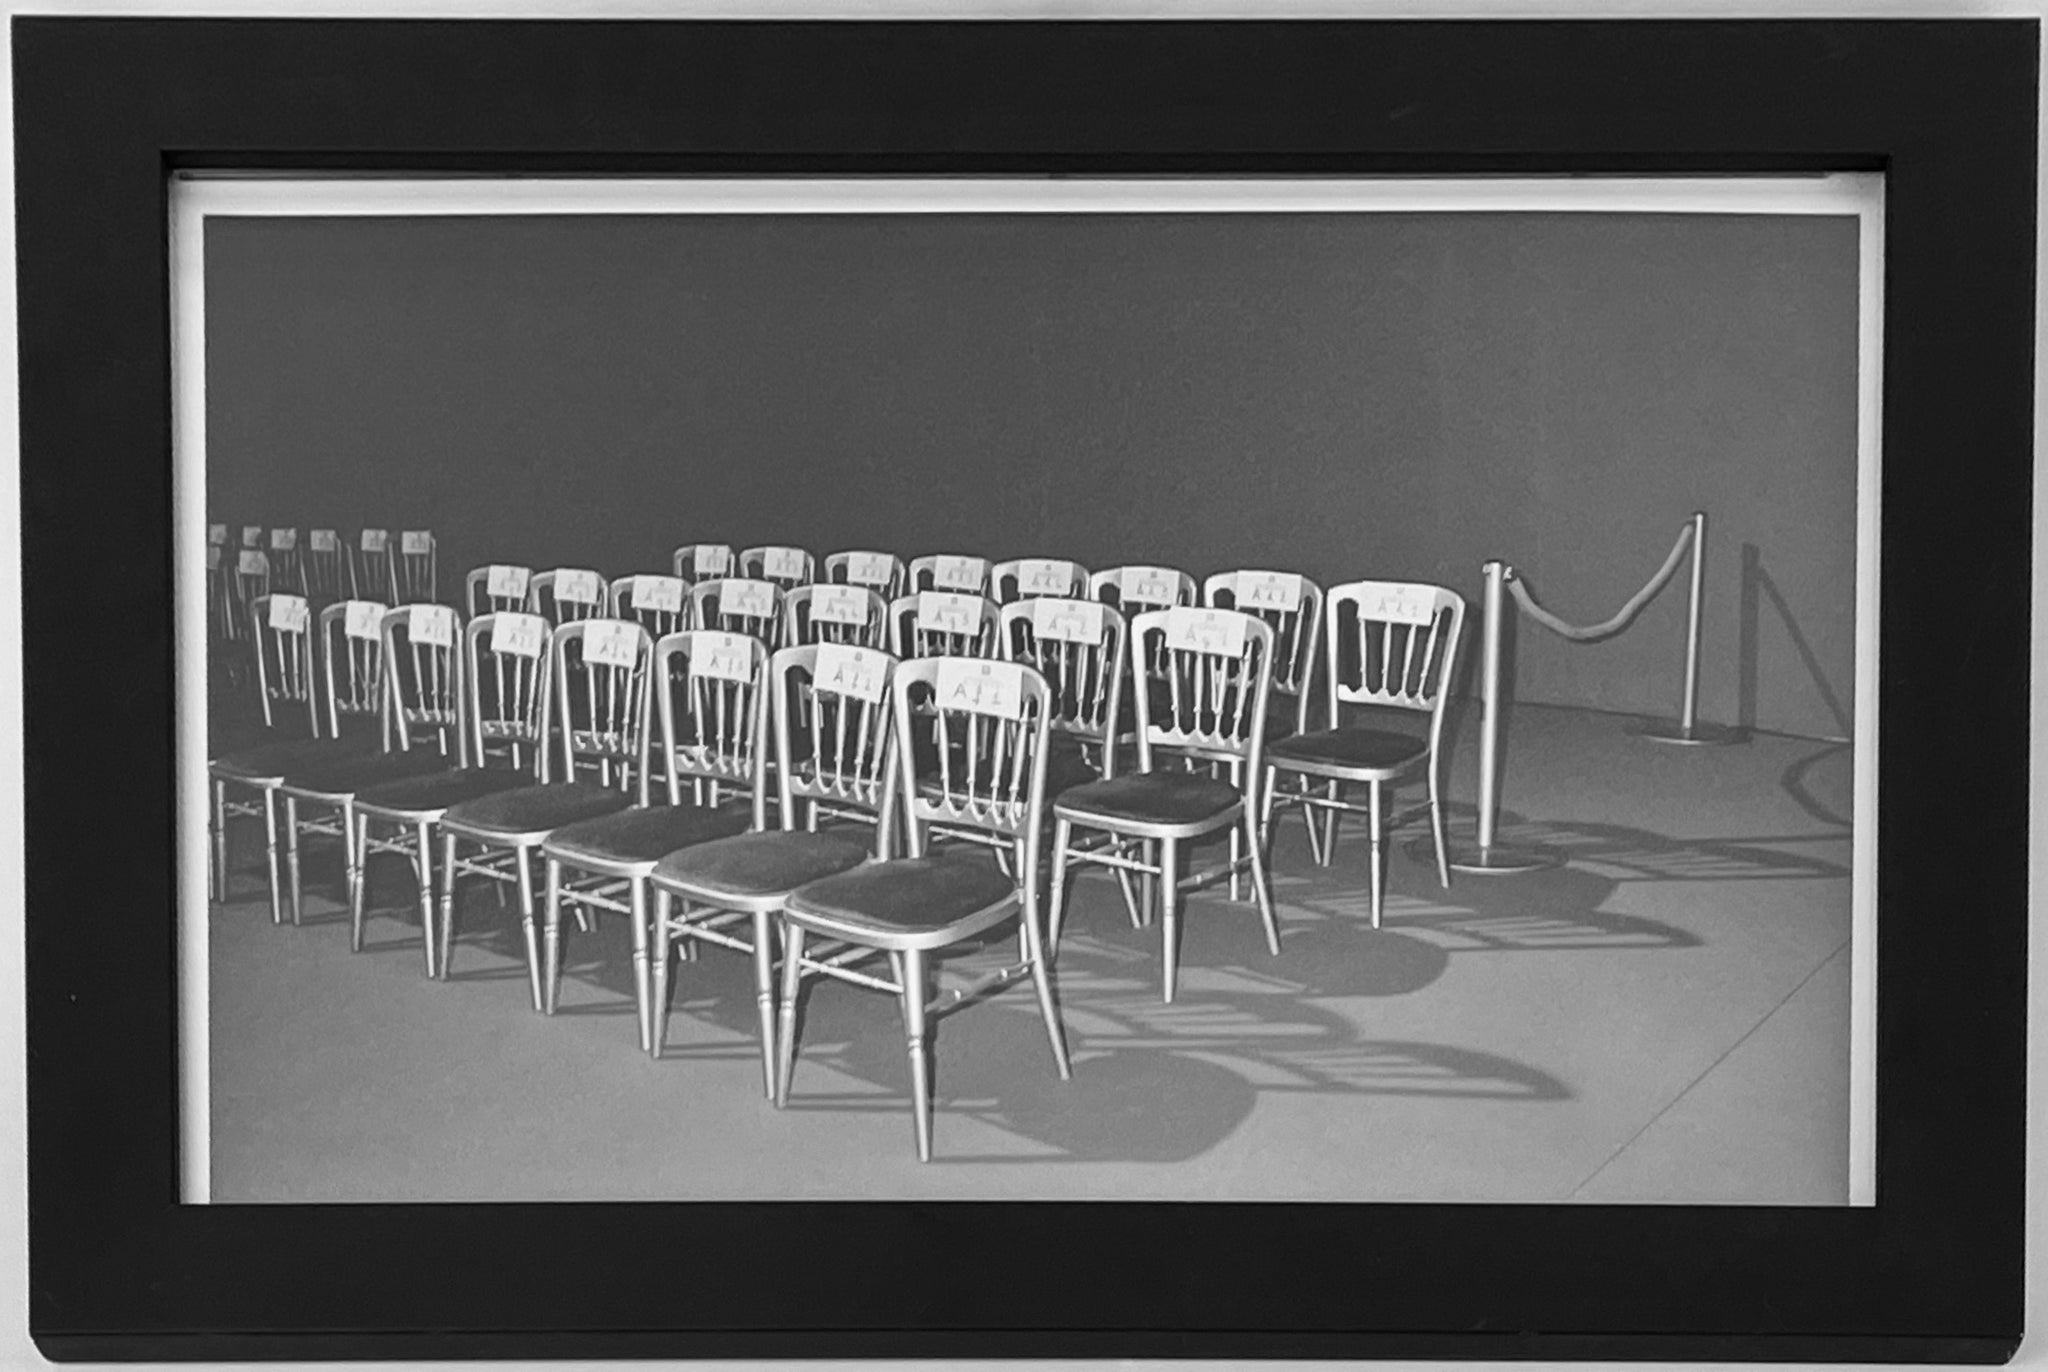 Ladin, Miles. Chairs at the Givenchy fashion show, Paris, 1996